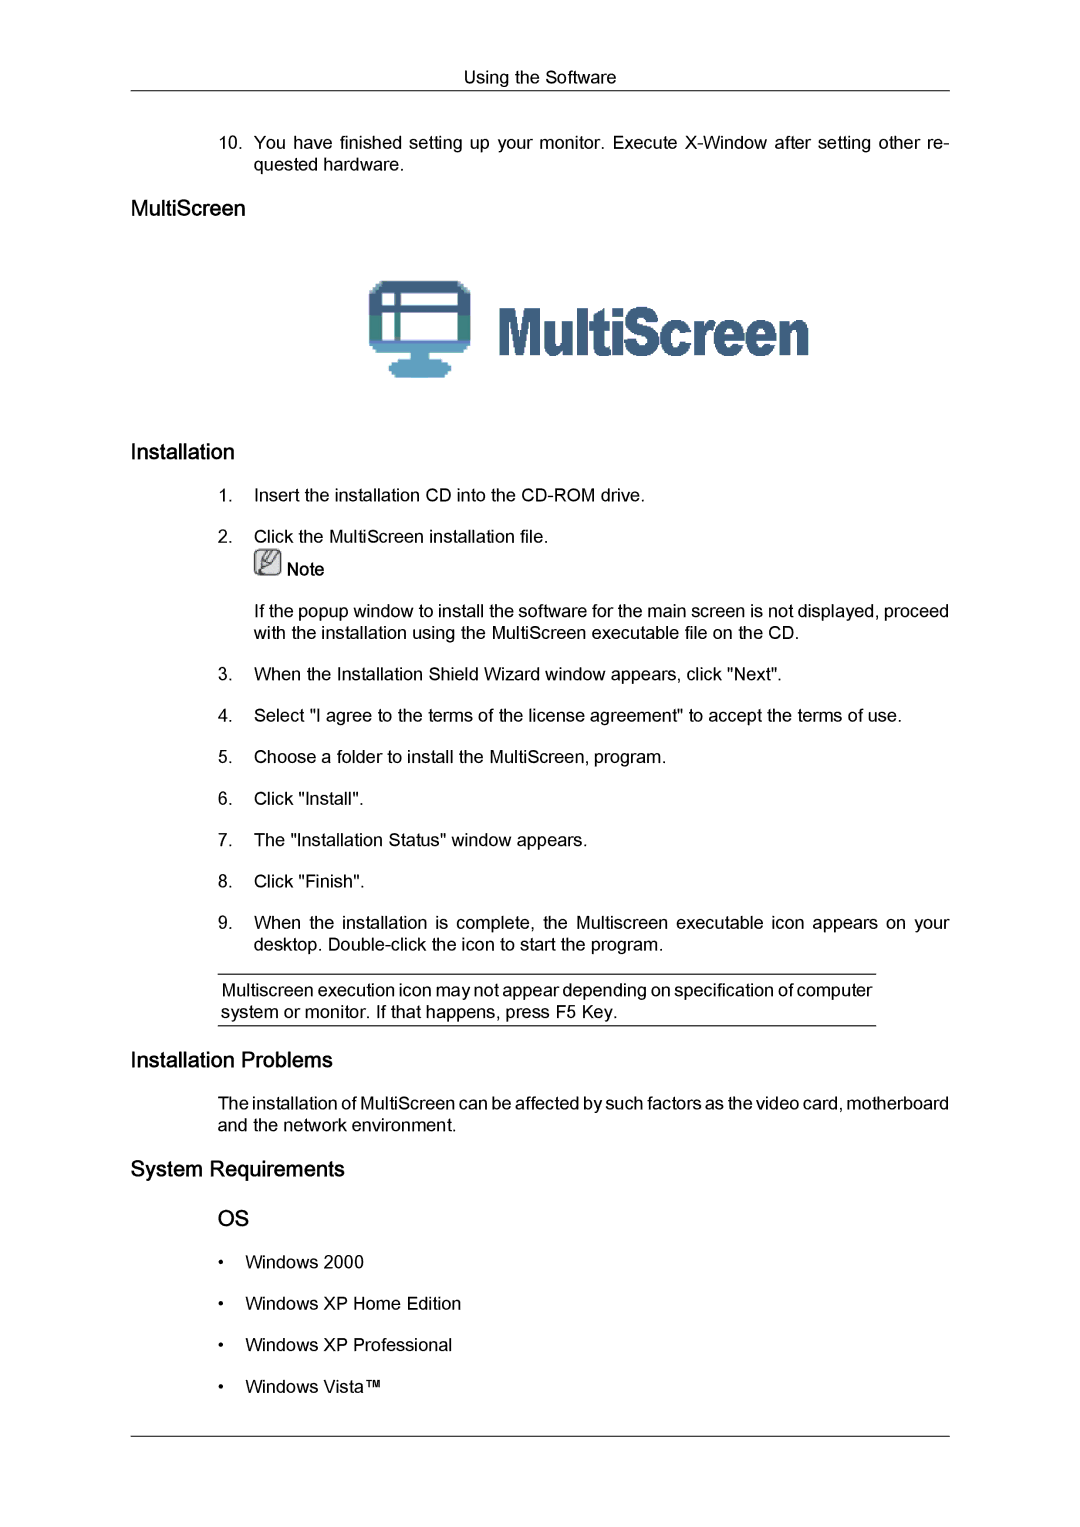 Samsung LD190N user manual MultiScreen Installation, Installation Problems, System Requirements 